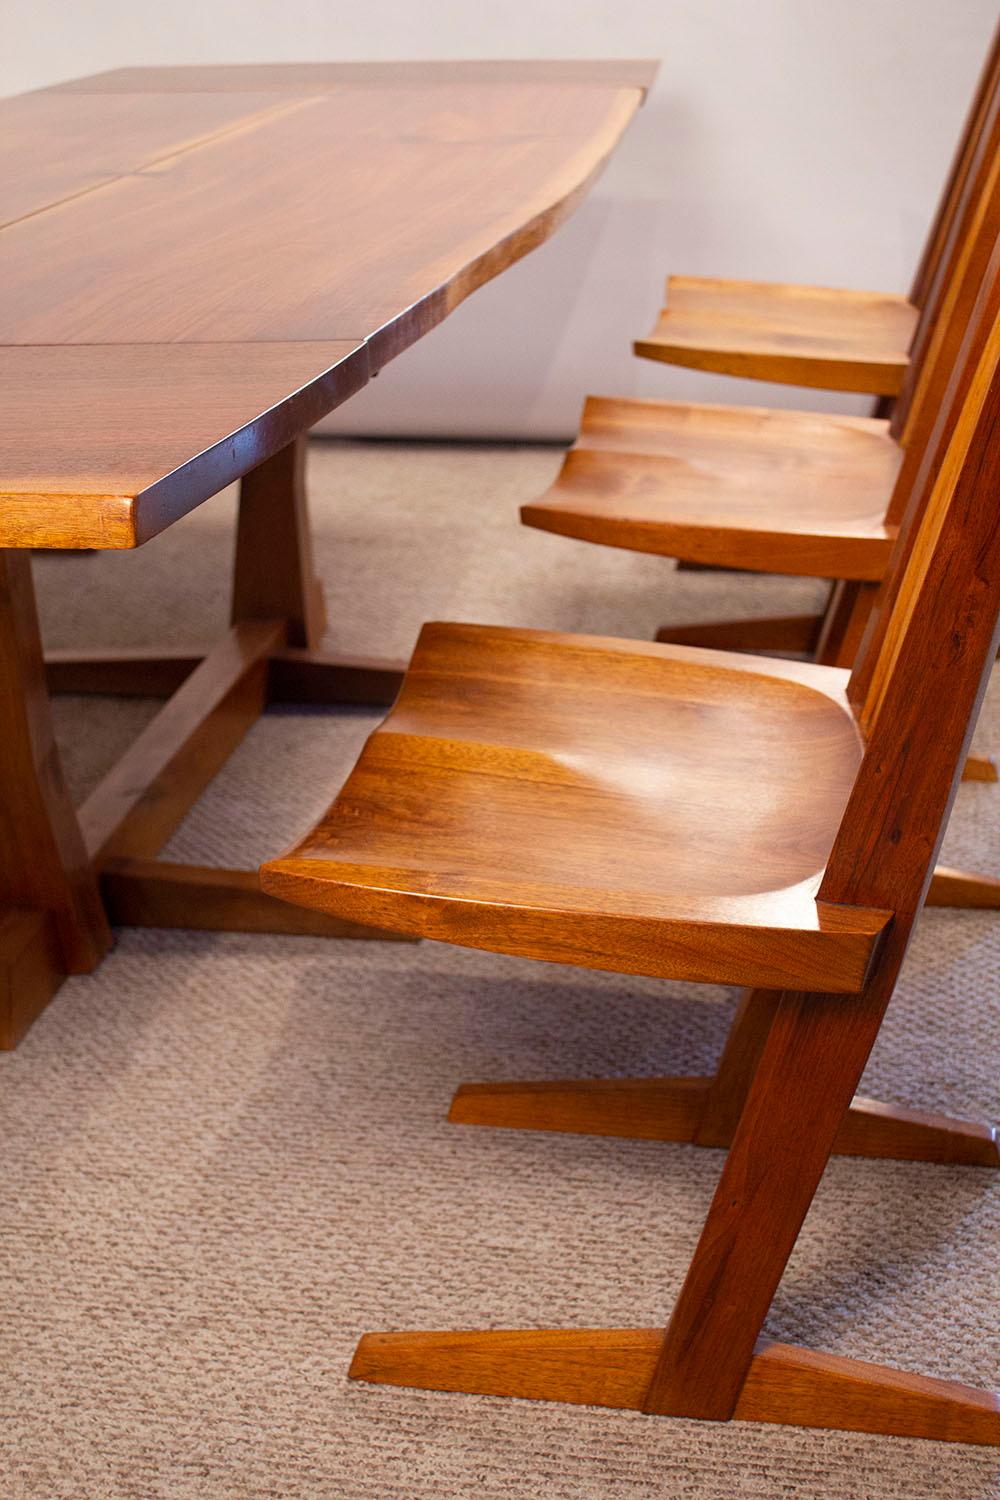 20th Century George Nakashima Conoid Dining Set in Sap Walnut with Free Form Edges & 6 Chairs